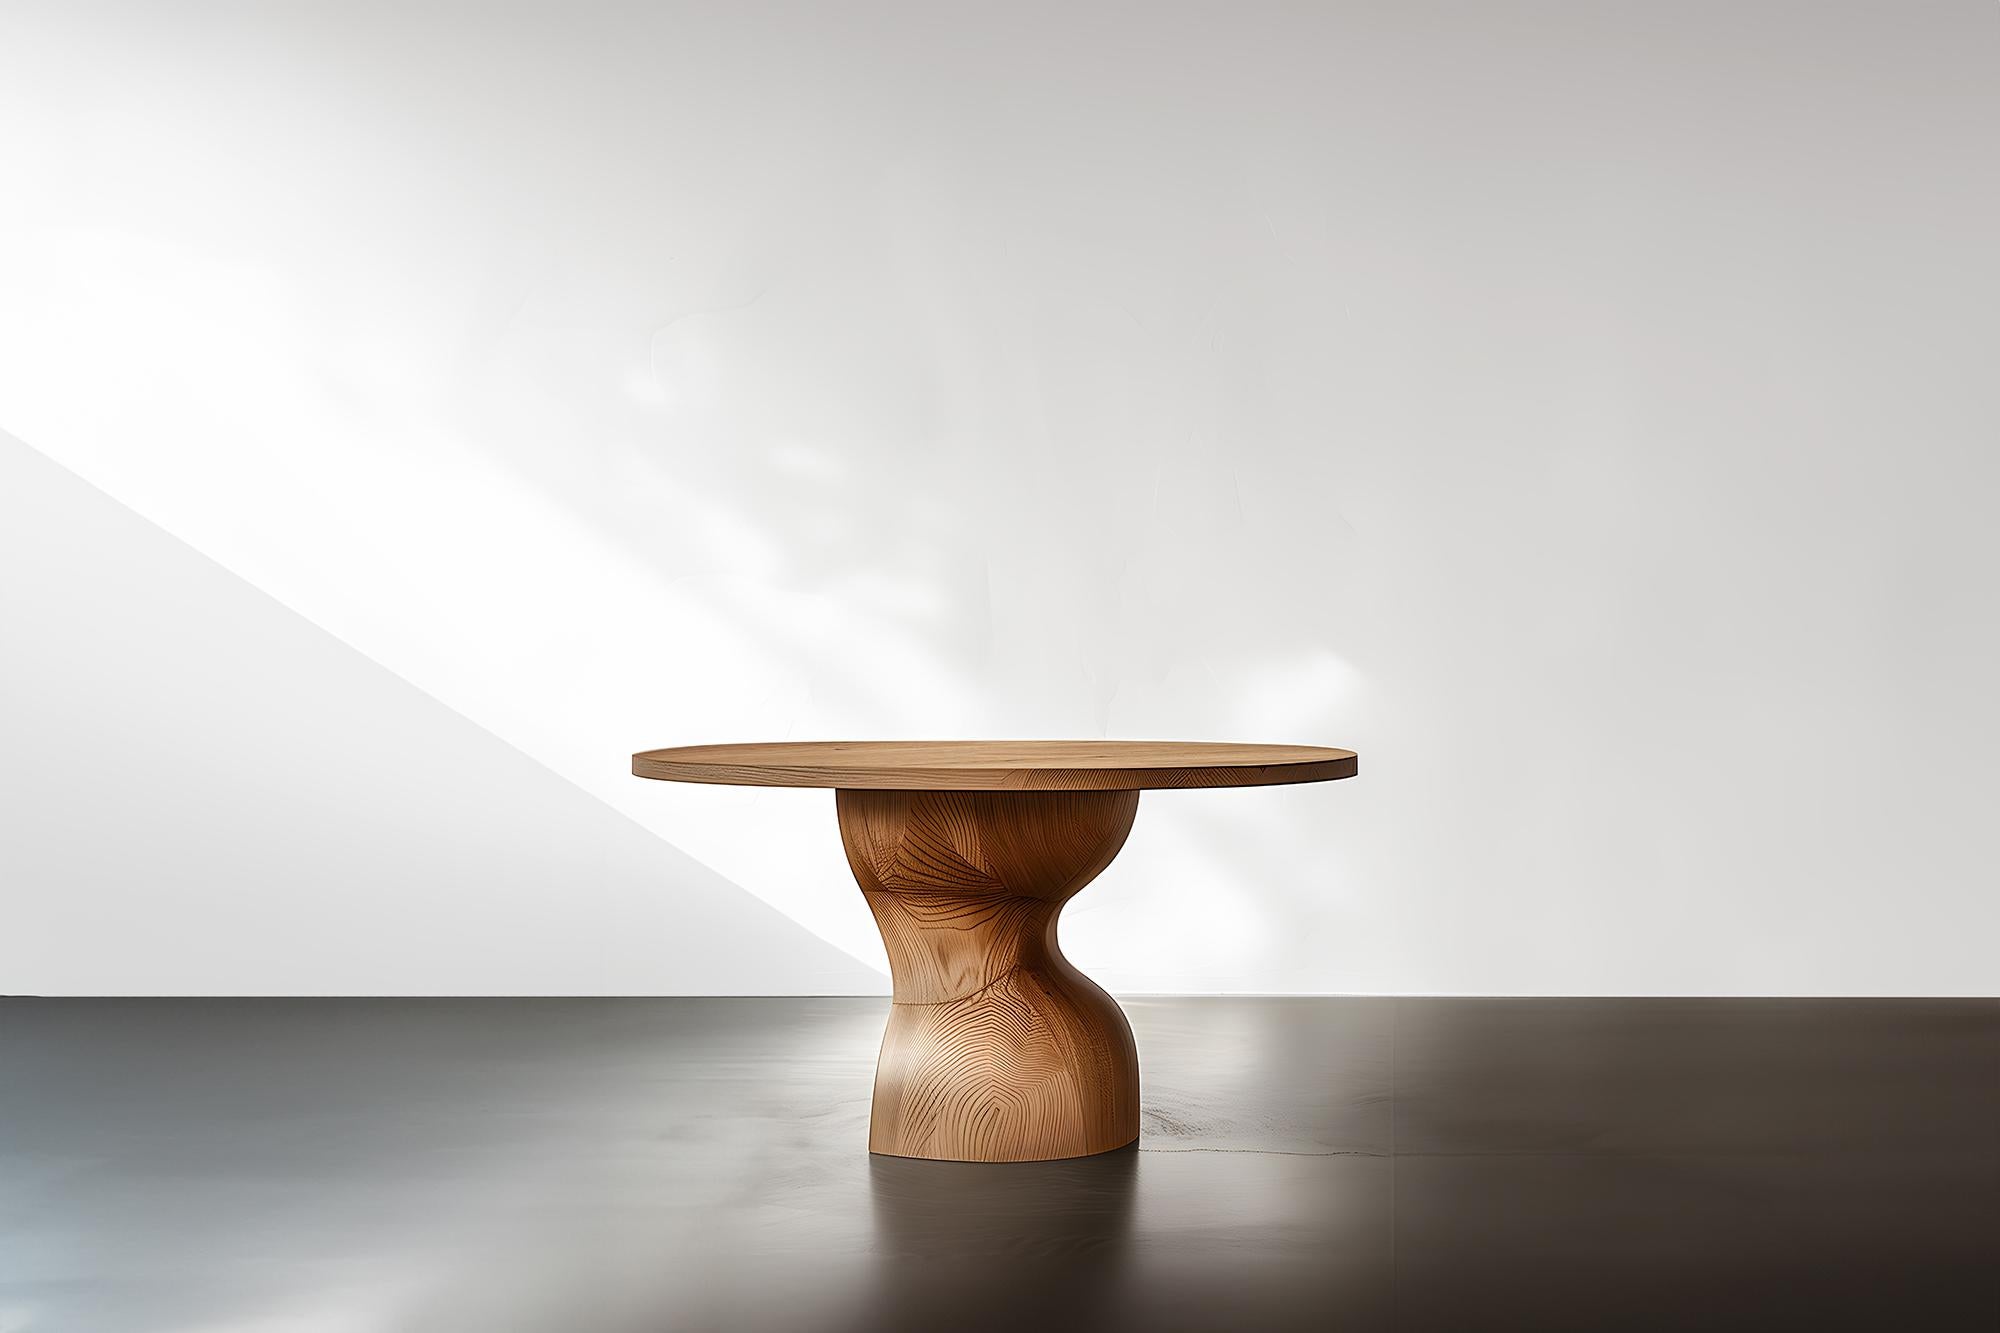 Game Tables by Socle No17, NONO Design, Solid Wood Play

——

Introducing the 